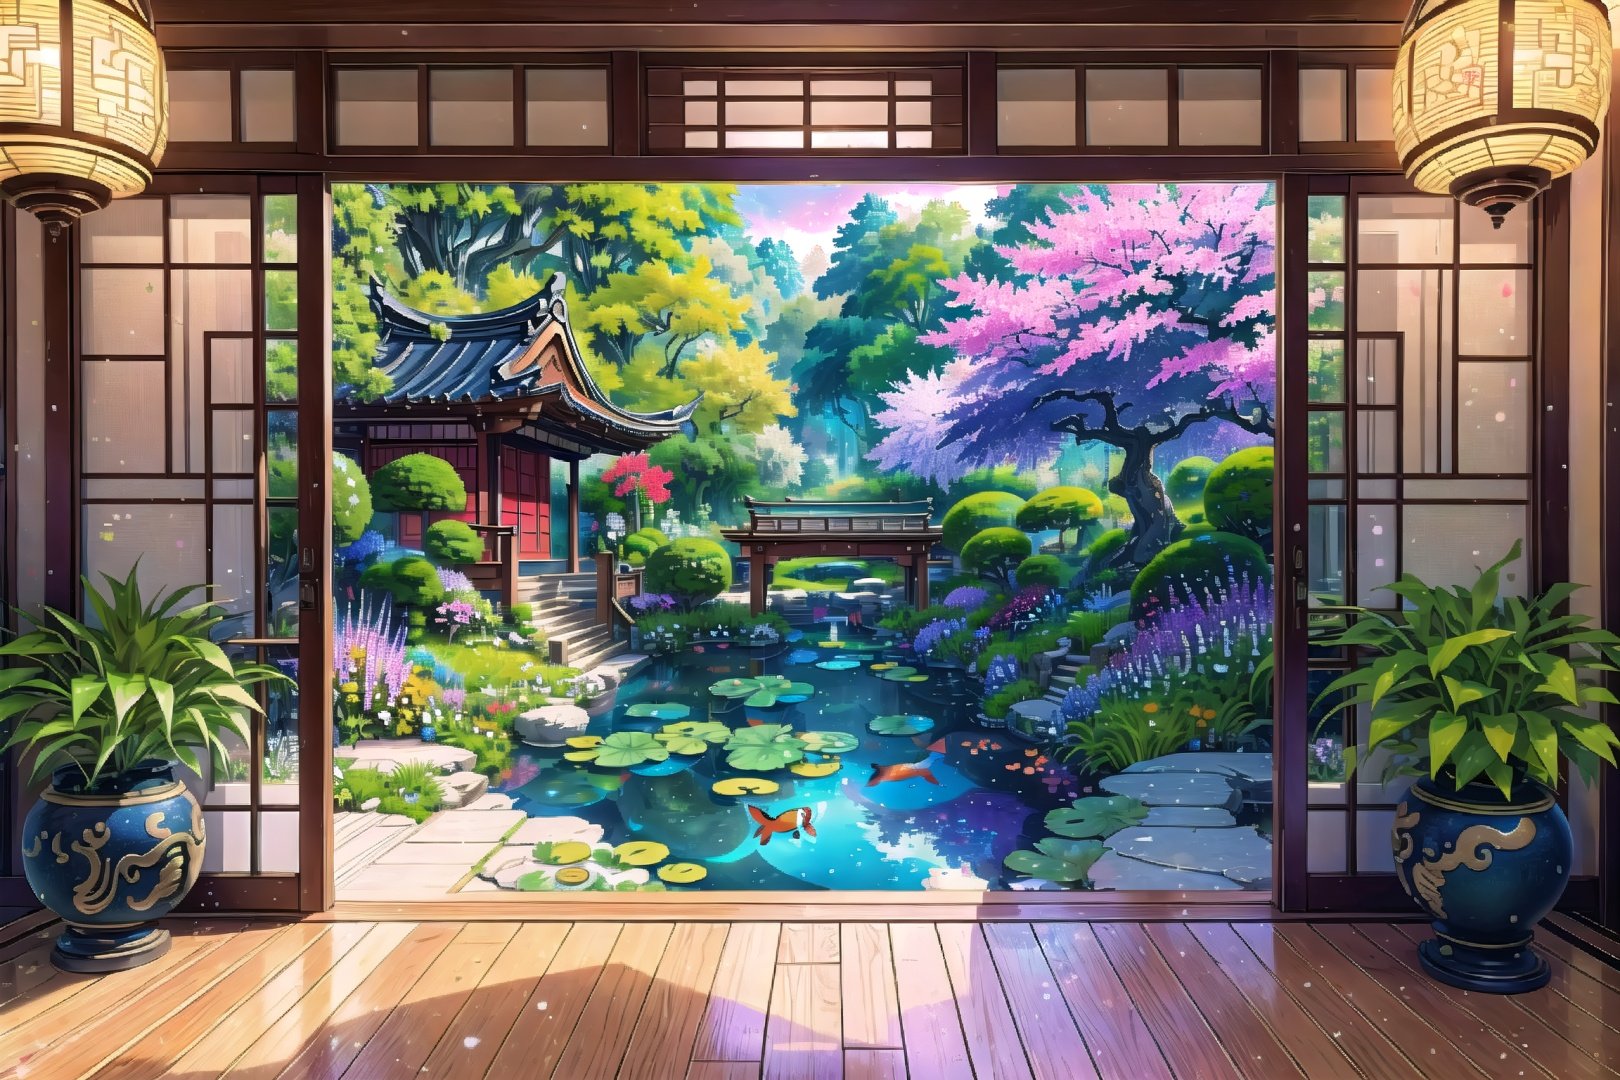 Immerse yourself in a (masterpiece,  best quality,  CGI:1.2) artwork that brings to life a fantastic vortex of colors in a vibrant magical realm,  top quality,  8k,  perfect lighting and composition,  bloom,  (gradients),  rainbow,  indoors,  east asian architecture,  reflective floor,  wooden floor,  human furniture,  (intricate details:1.2),  (glowing flora and fauna:1.2),  creating a whimsical and enchanting atmosphere,  (no humans:1.3),  hatching (texture),  courtyard in background,  (blurry foreground:1.1),  deep depth of field,  floating particles,  koi pond,  lilypad,  overgrown,  moon door,  rug,  embroidery,  halation,  shadow, <lora:EMS-36517-EMS:0.000000>